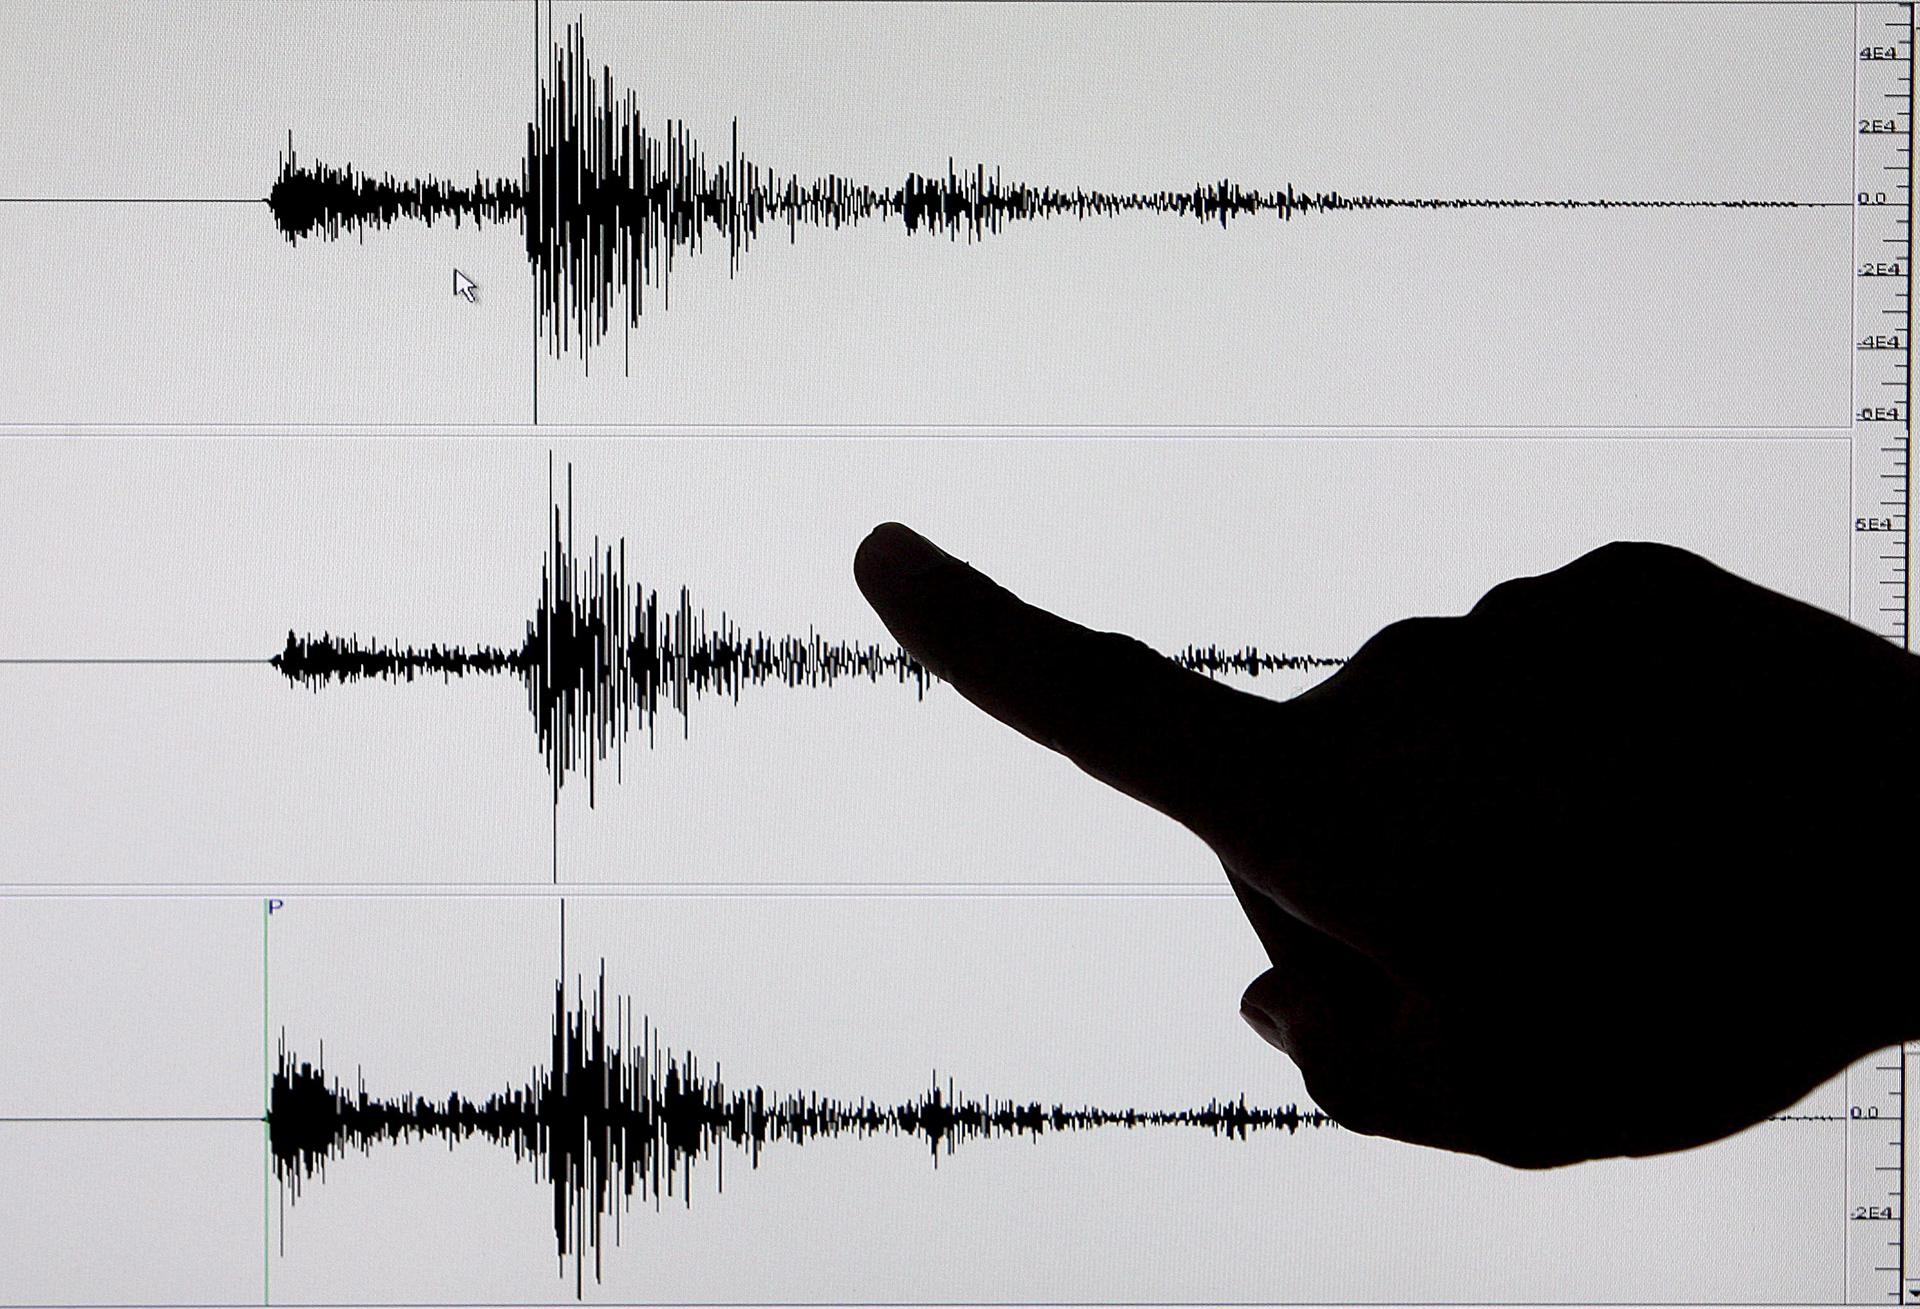 A 6-magnitude earthquake hits the western coast of Japan without a tsunami warning